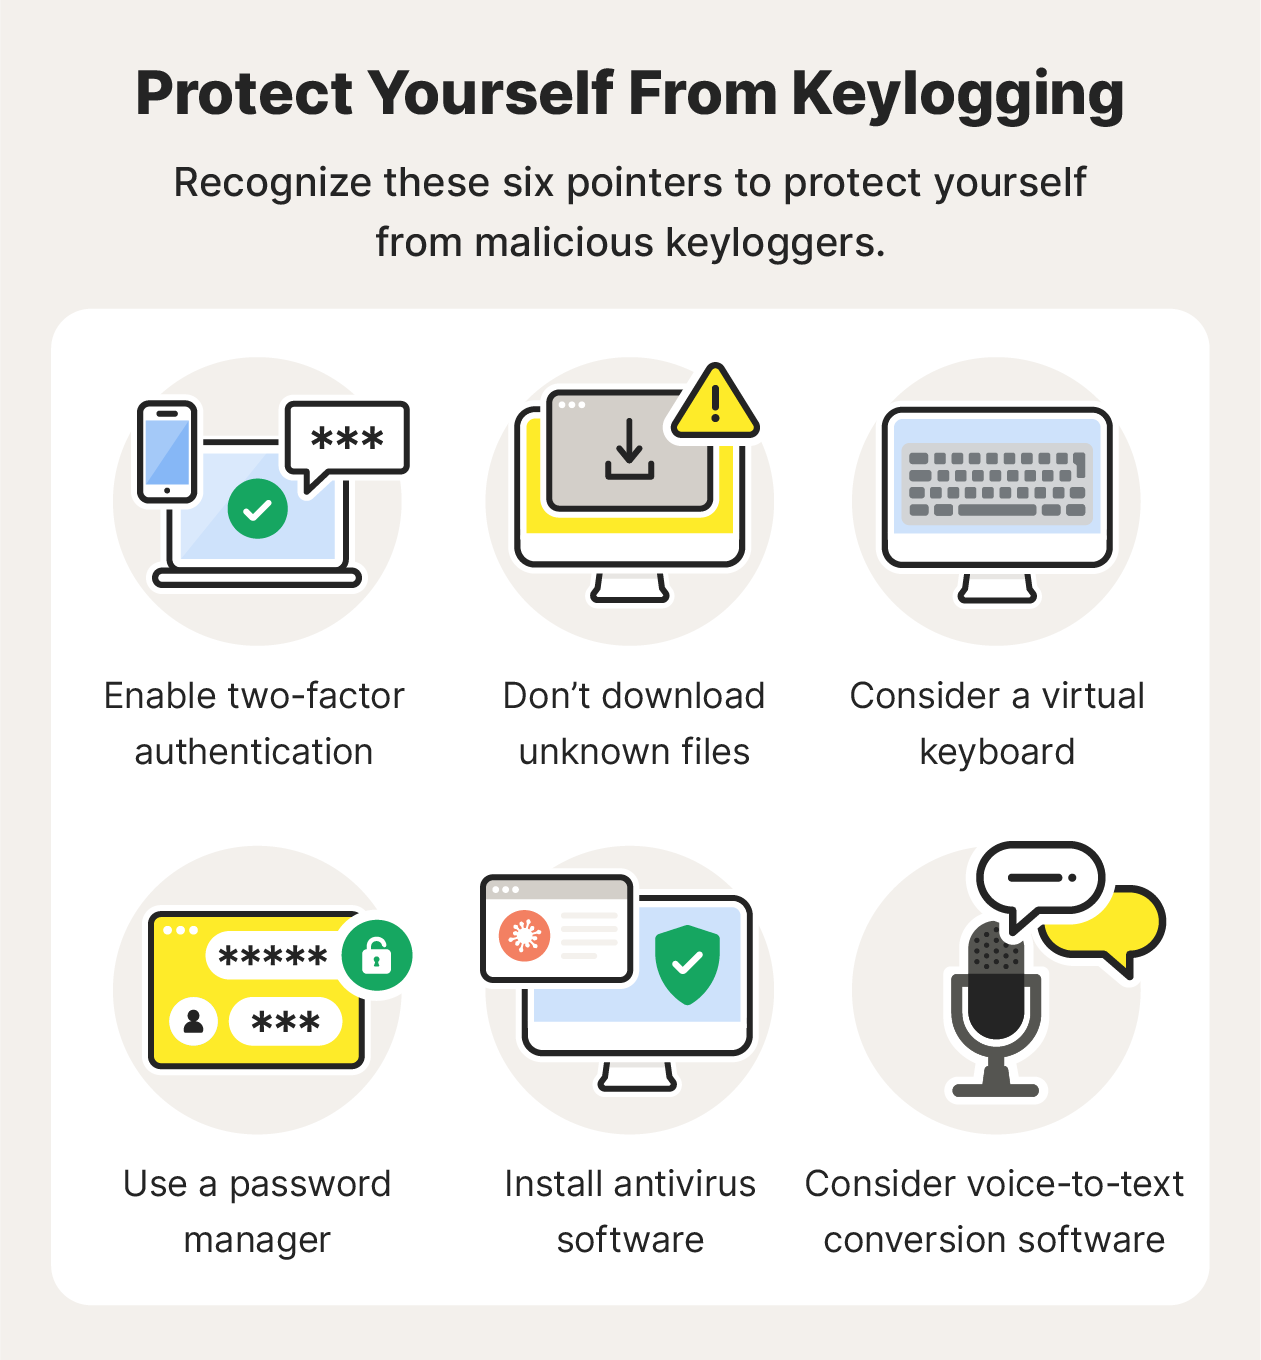 Tips to help protect yourself from keyloggers, further answering the question, “What is a keylogger?"